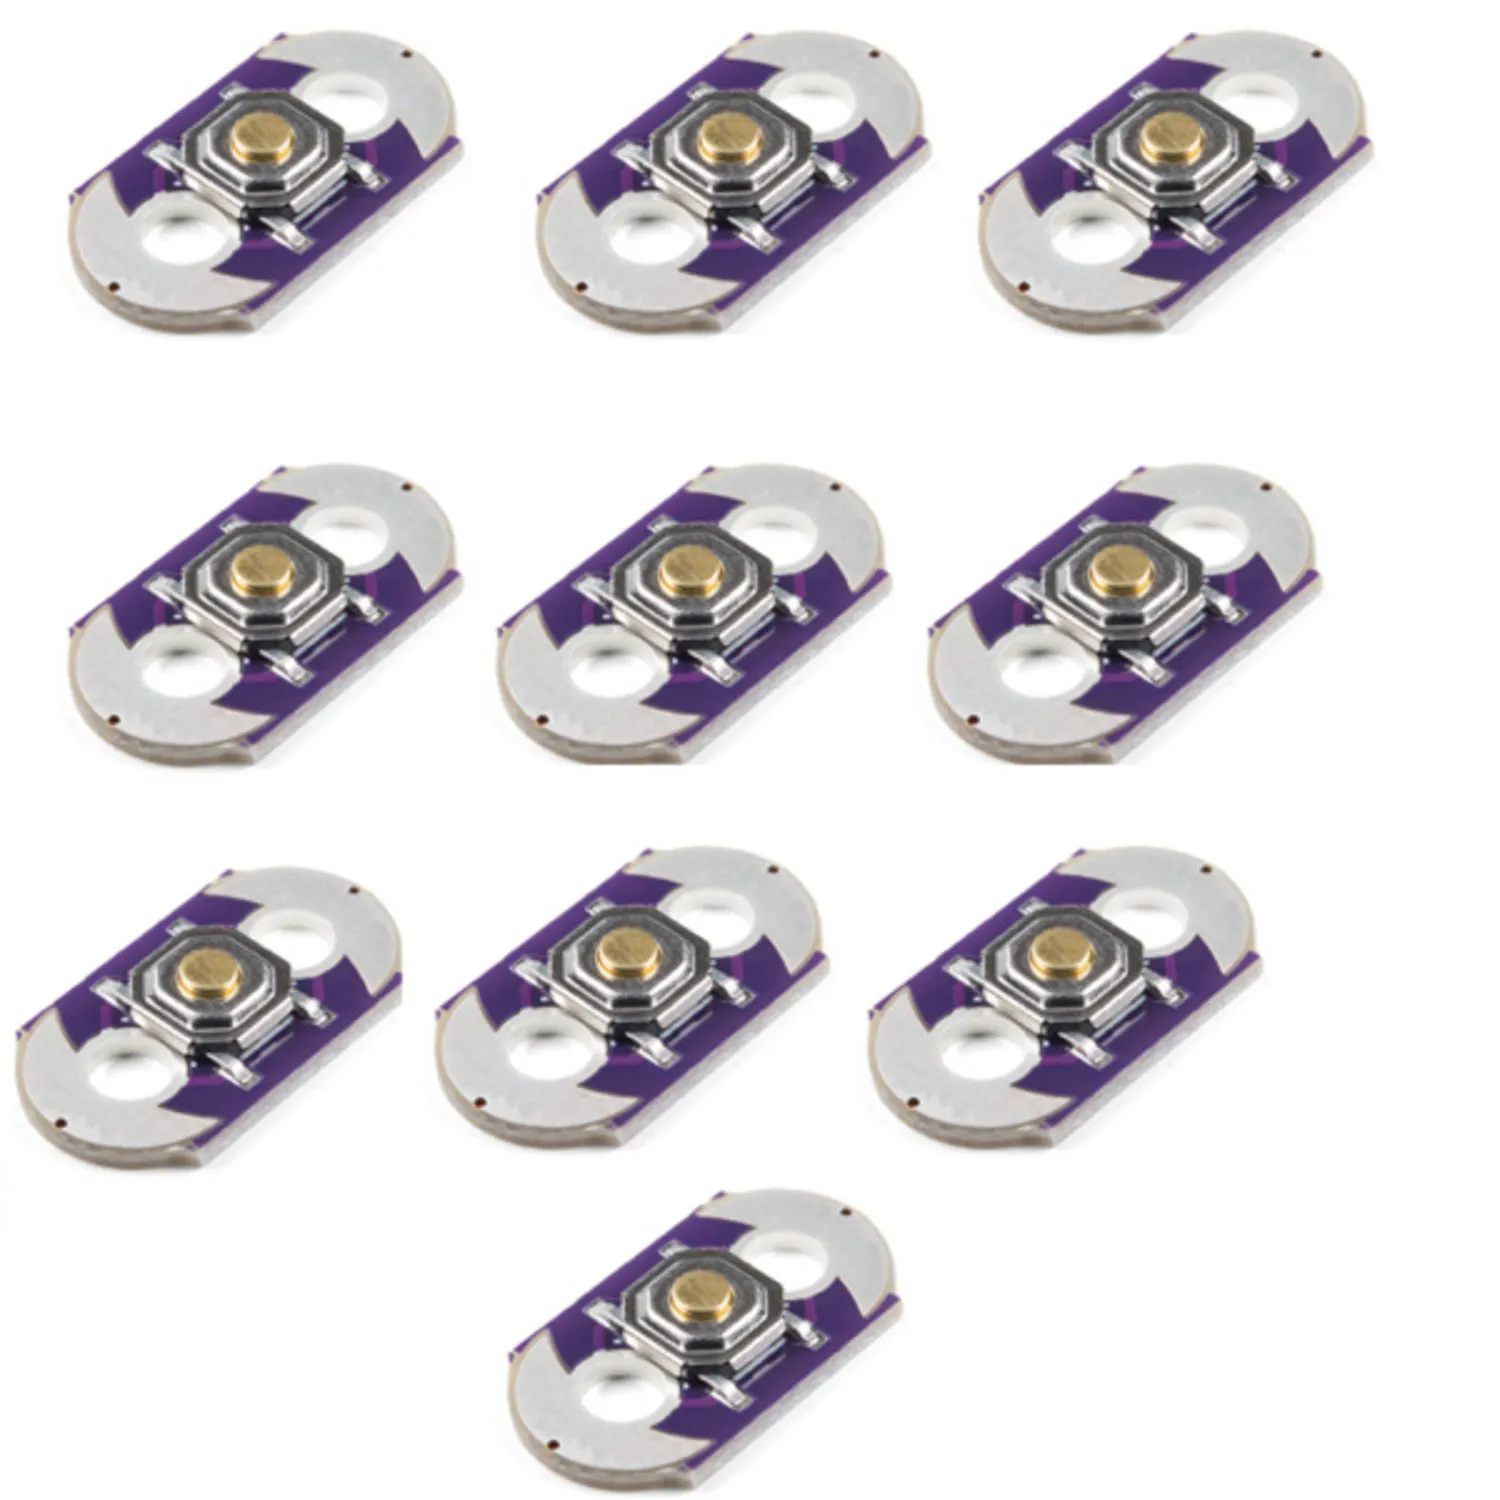 Photo of E-Textiles Momentary Push Button - 10 Pack